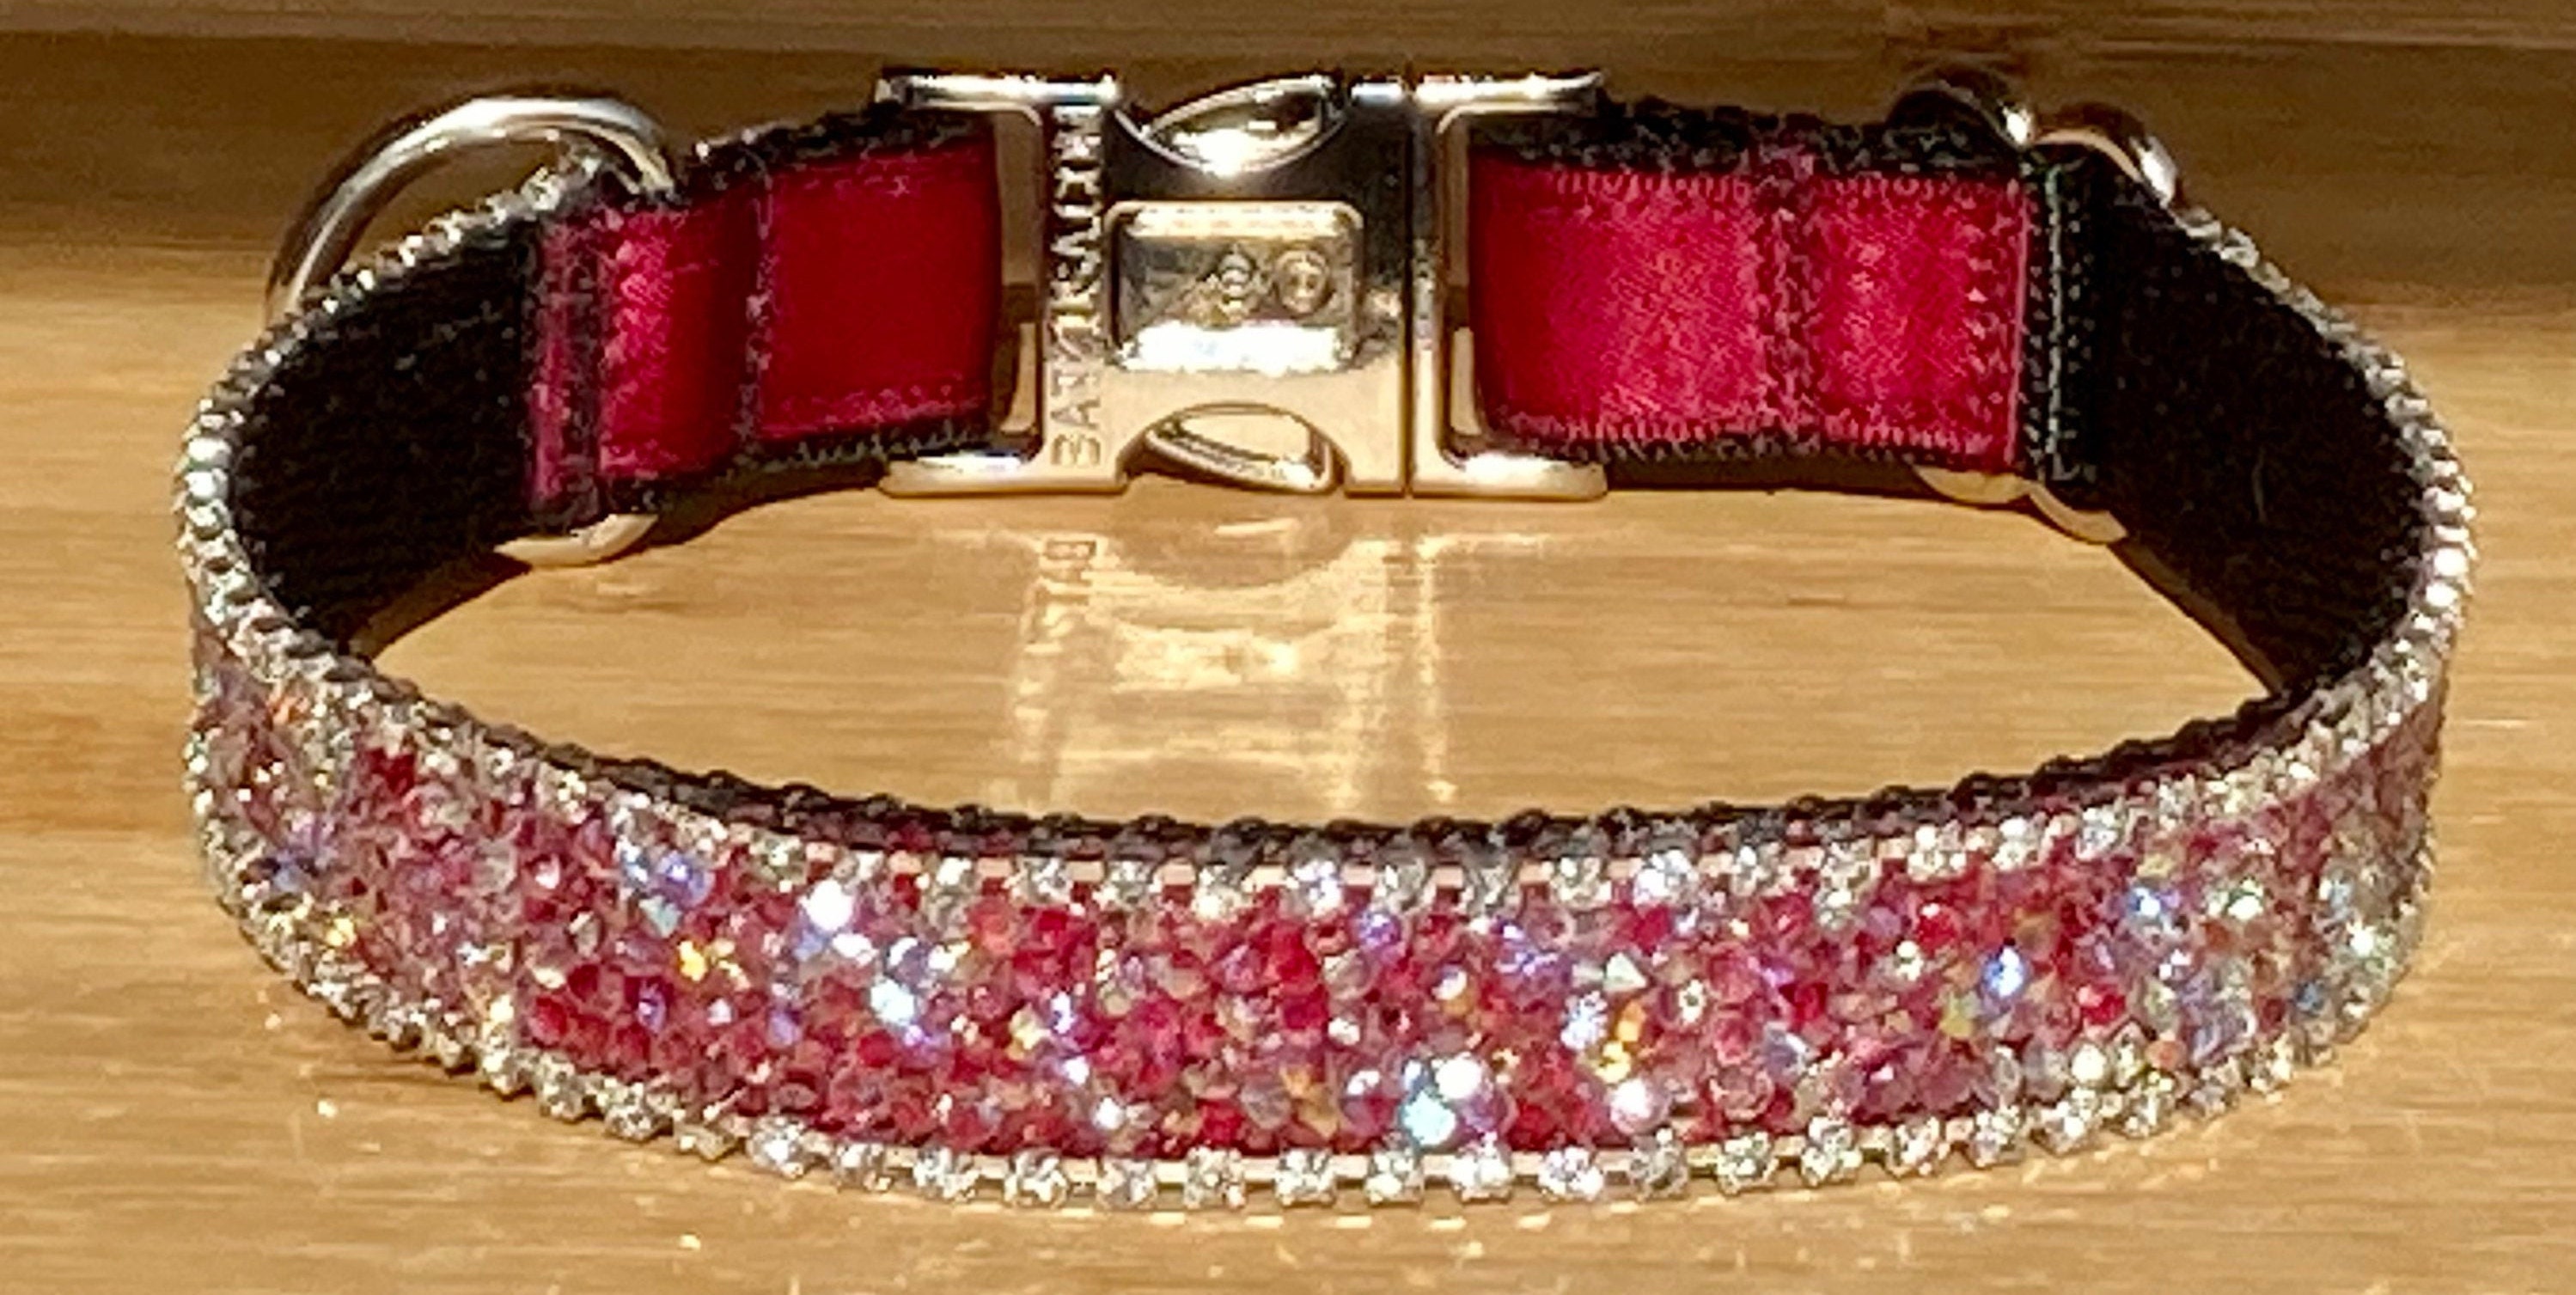 esafio Cute Dog Collar with Bling Bling Rhinestones - Diamond Flower  Pattern Studded Leather Dog Collar ( Pink )- Fit Small and Medium 